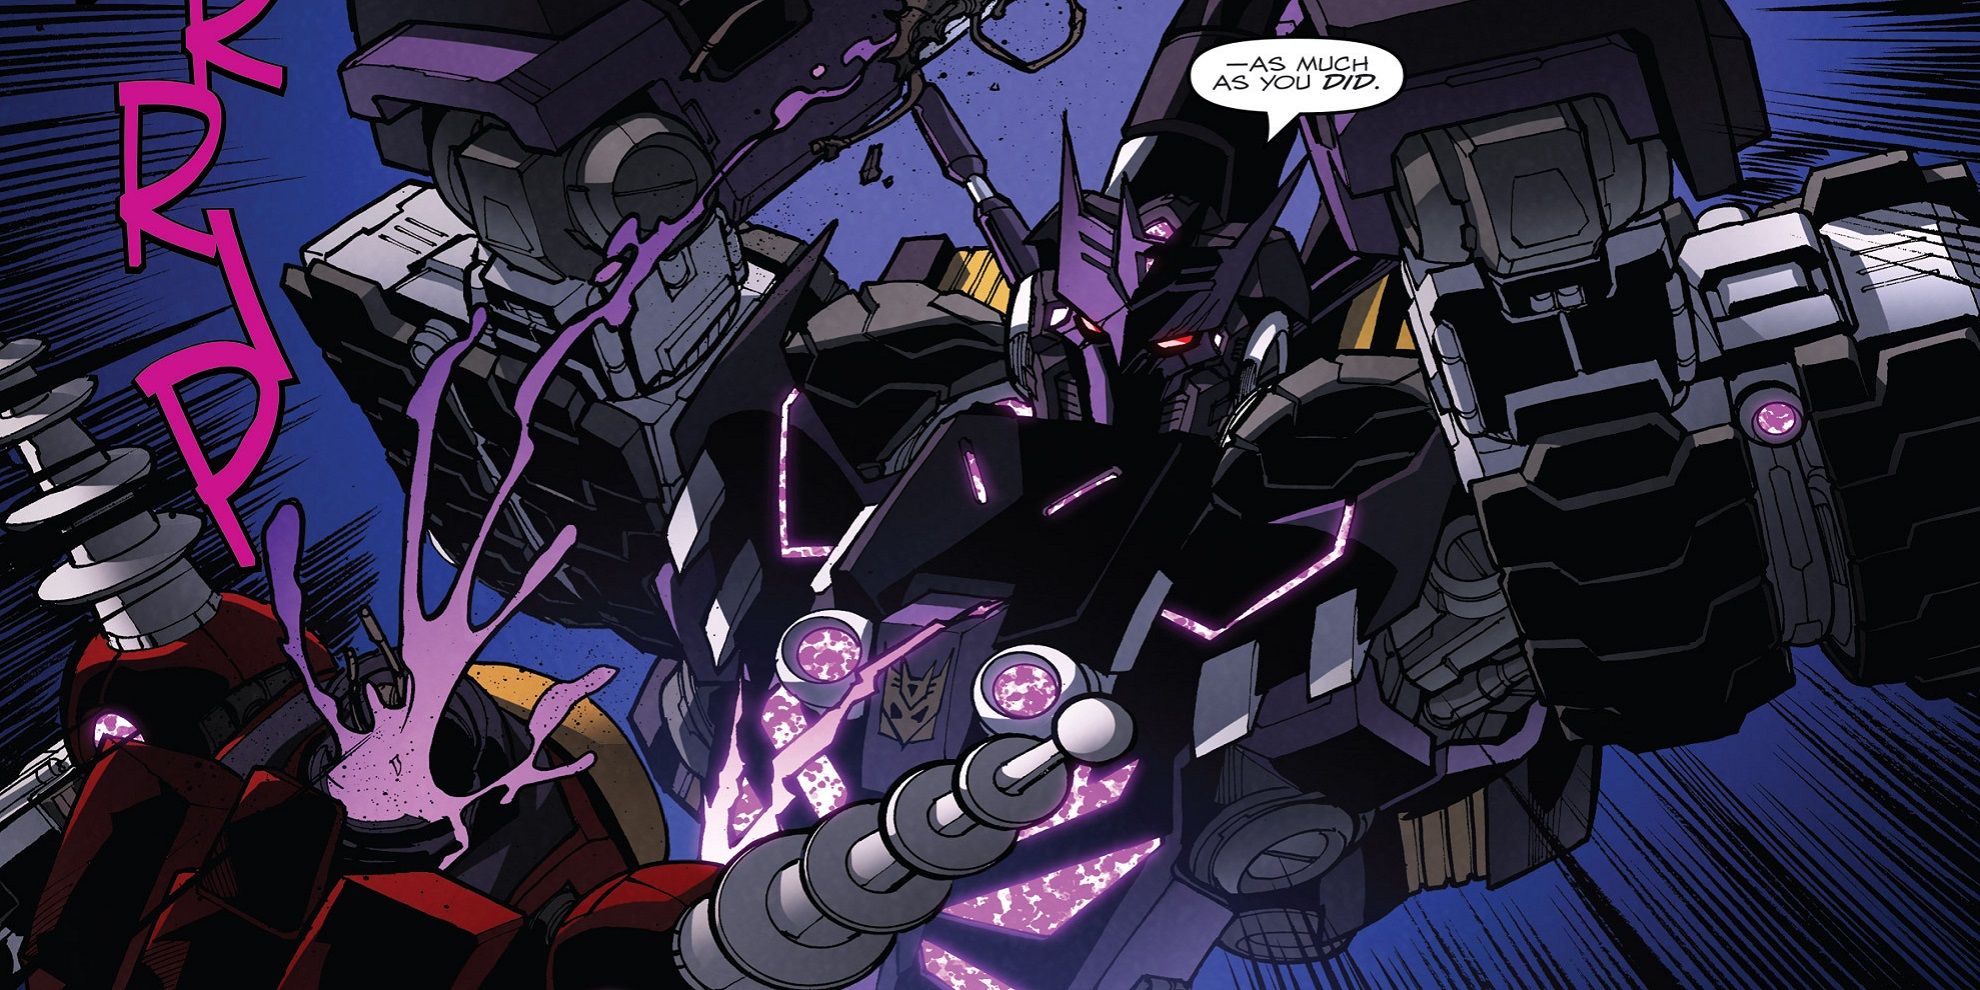 Tarn ripping another Decepticon apart in Transformers